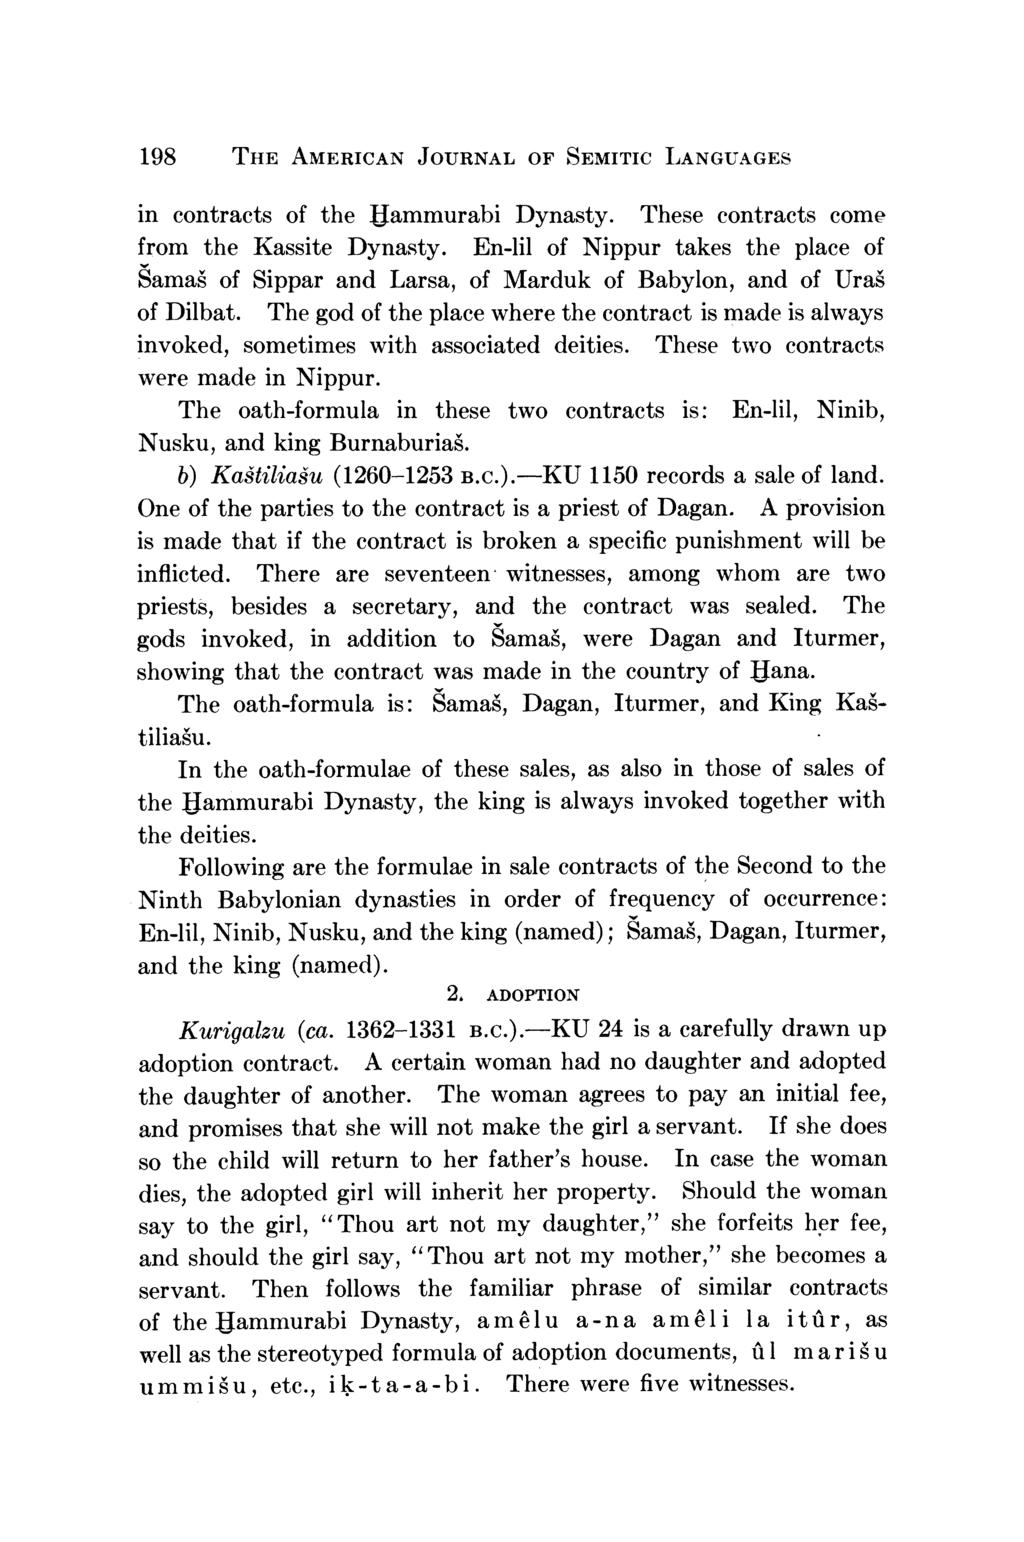 198 THE AMERICAN JOURNAL OF SEMITIC LANGUAGES in contracts of the Uammurabi Dynasty. These contracts come from the Kassite Dynasty.